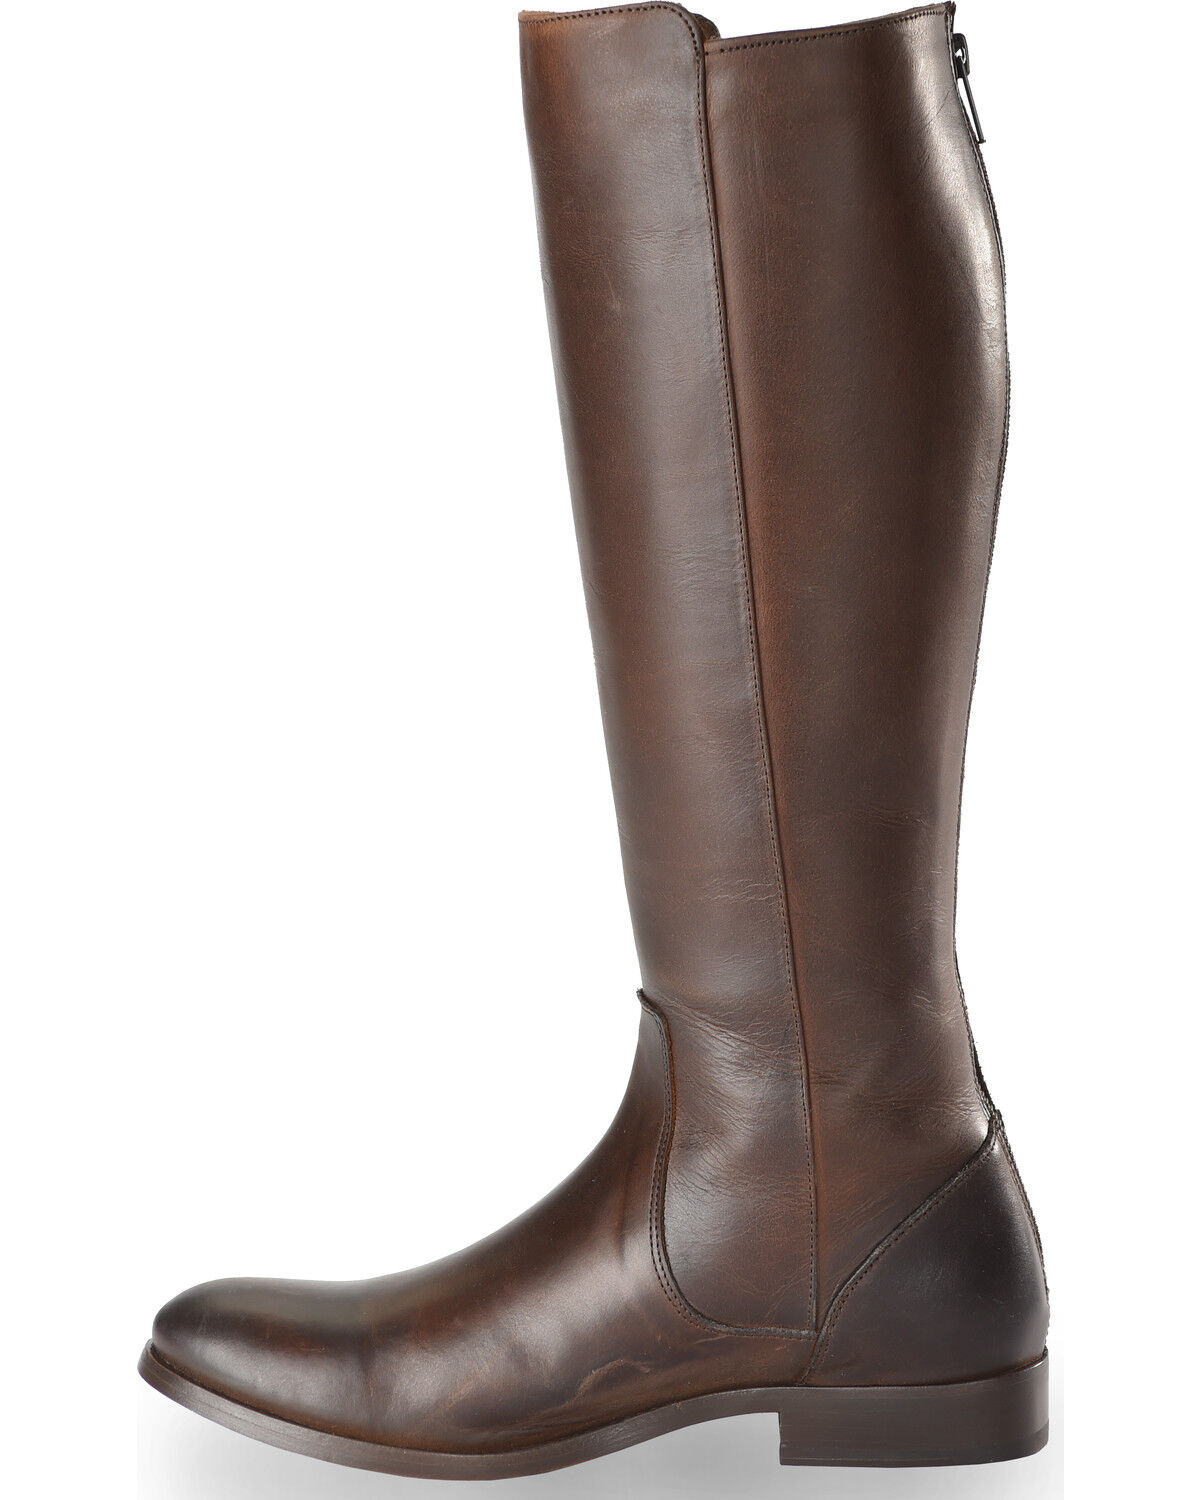 Frye Melissa Stud Back Zip Leather Casual Knee-High Tall Womens Boots